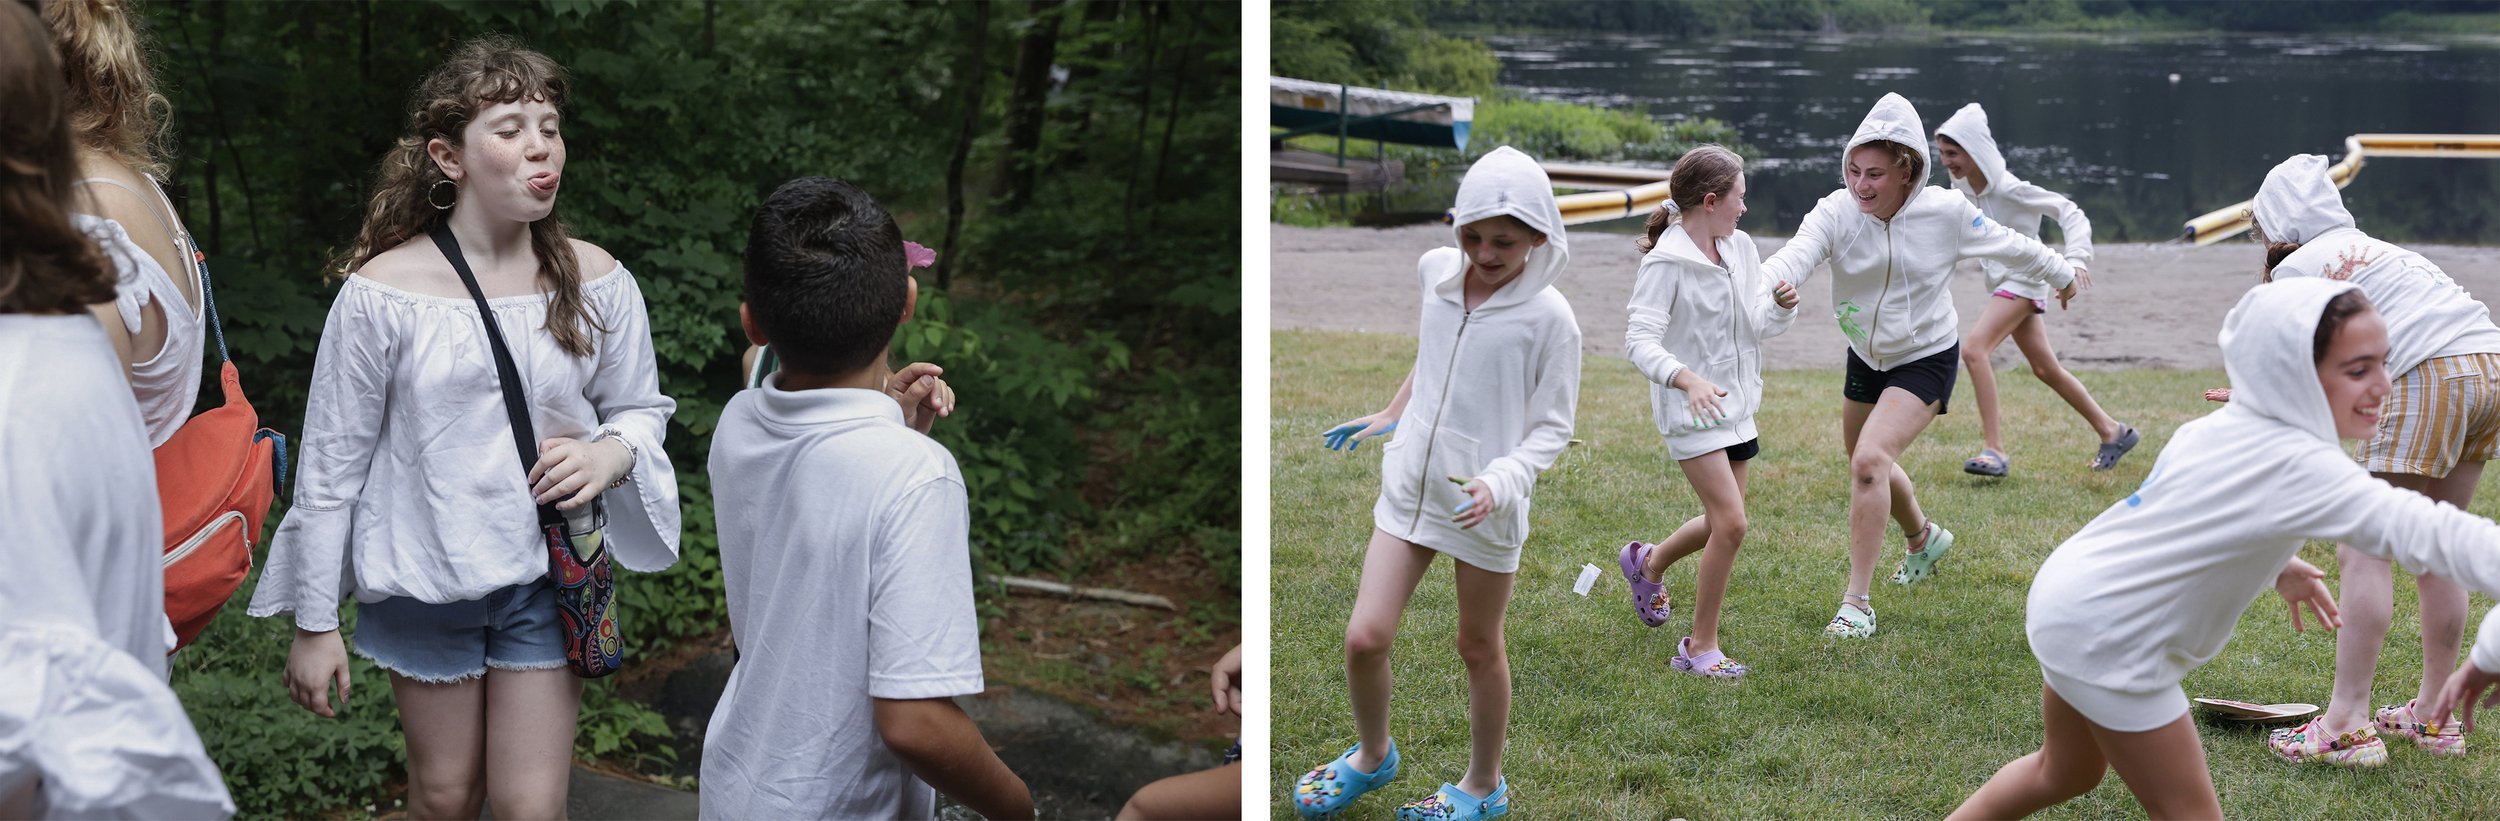  (LEFT) Josie Levin sticks her tongue out at a boy after he teasingly asks her who she will go with to “banquet” (the camp dance) on July 9, 2021. All campers are in white for Friday night Shabbat services. (RIGHT) Sari Lampert, Eliza Goodman, Jocely